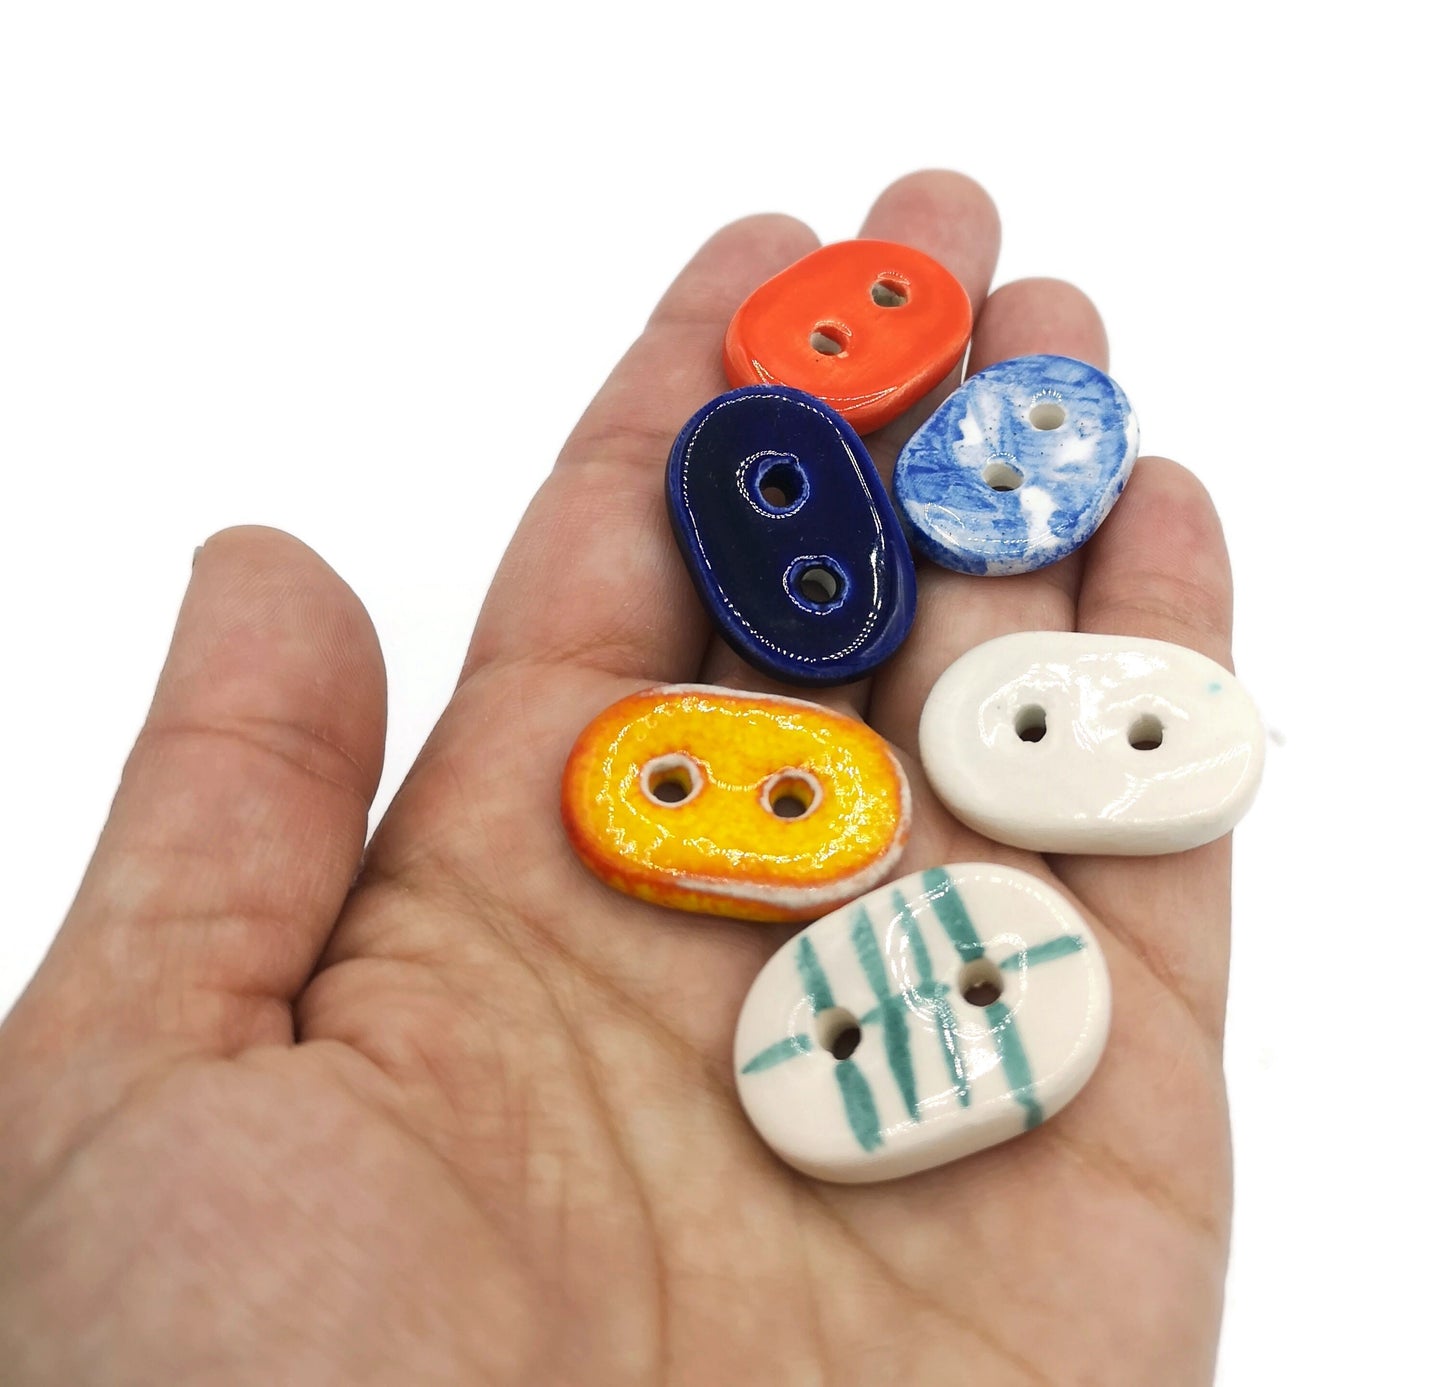 6 Pc 25mm Handmade Ceramic Oval Sewing Buttons, Coat Buttons For Crafts, Best Sellers Sewing Supplies And Notions, Unique Large Buttons - Ceramica Ana Rafael